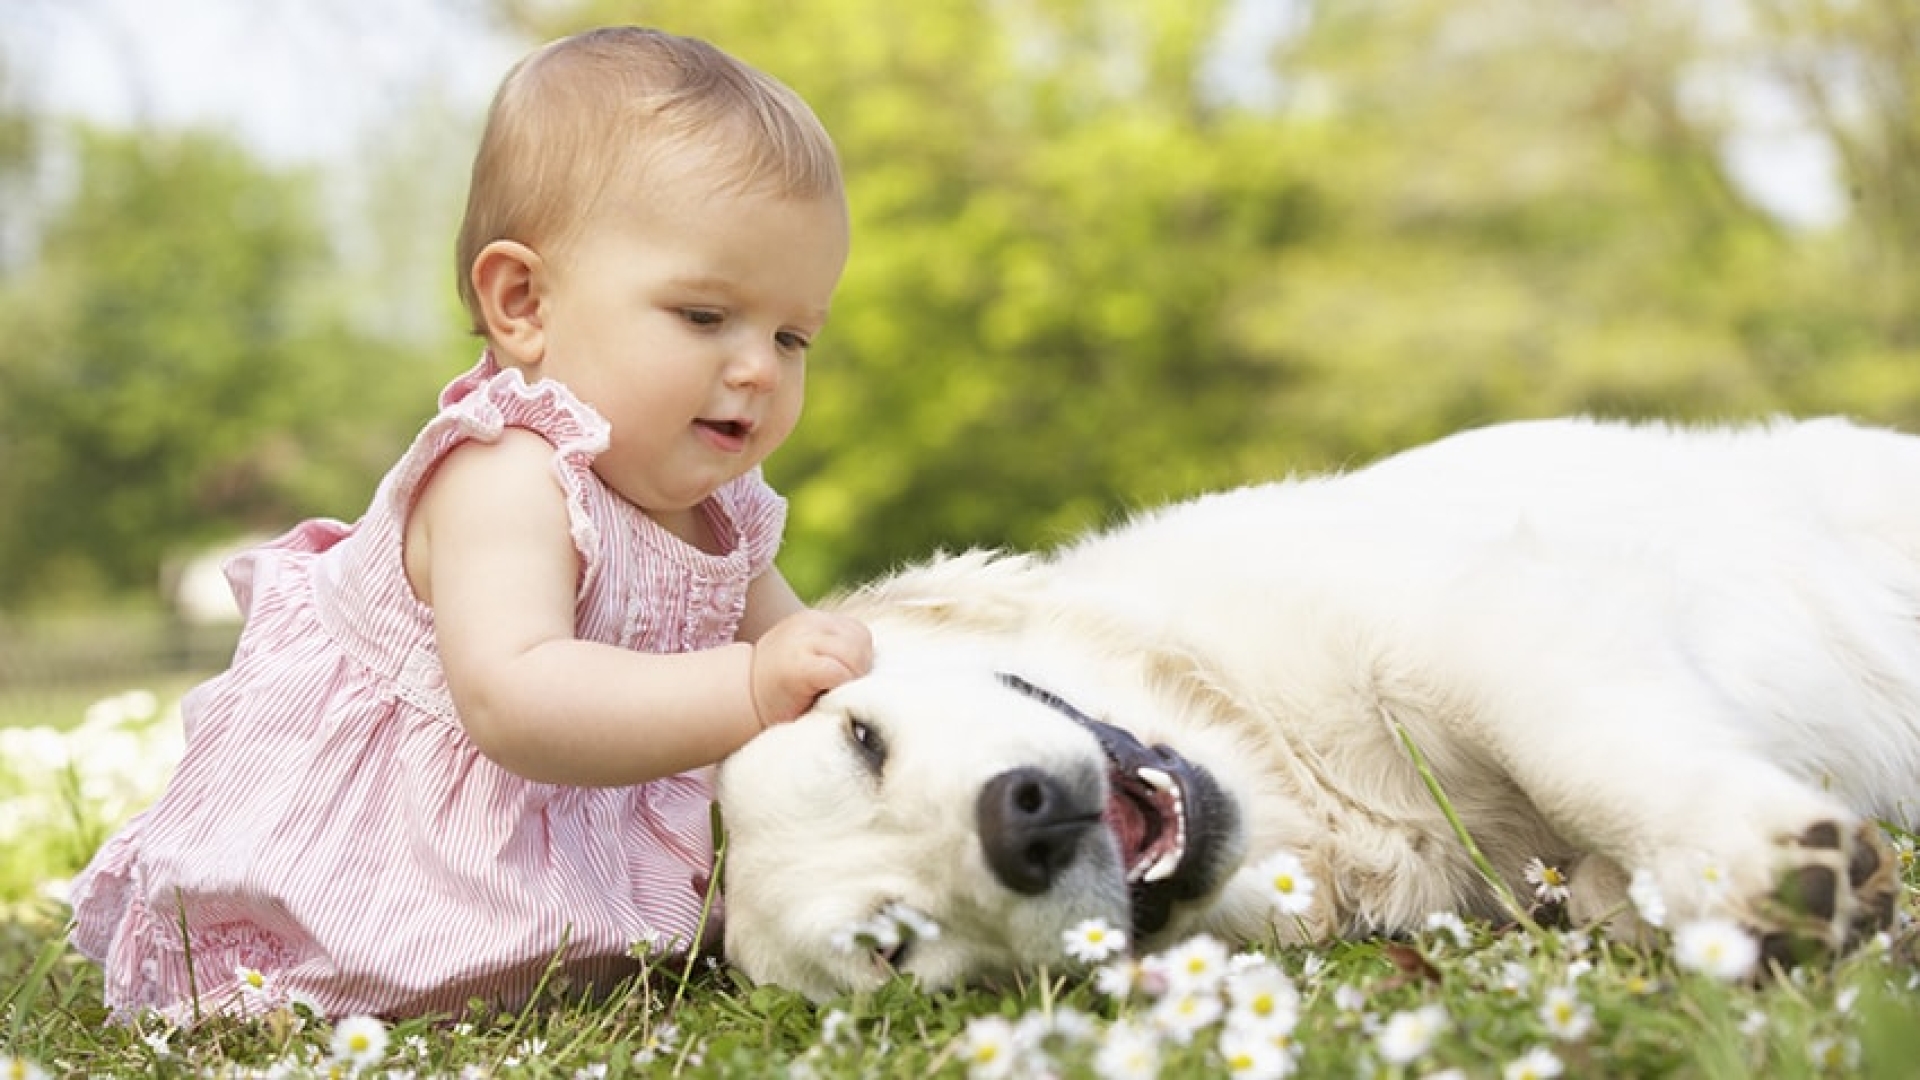 how do you acclimate a dog to a new baby